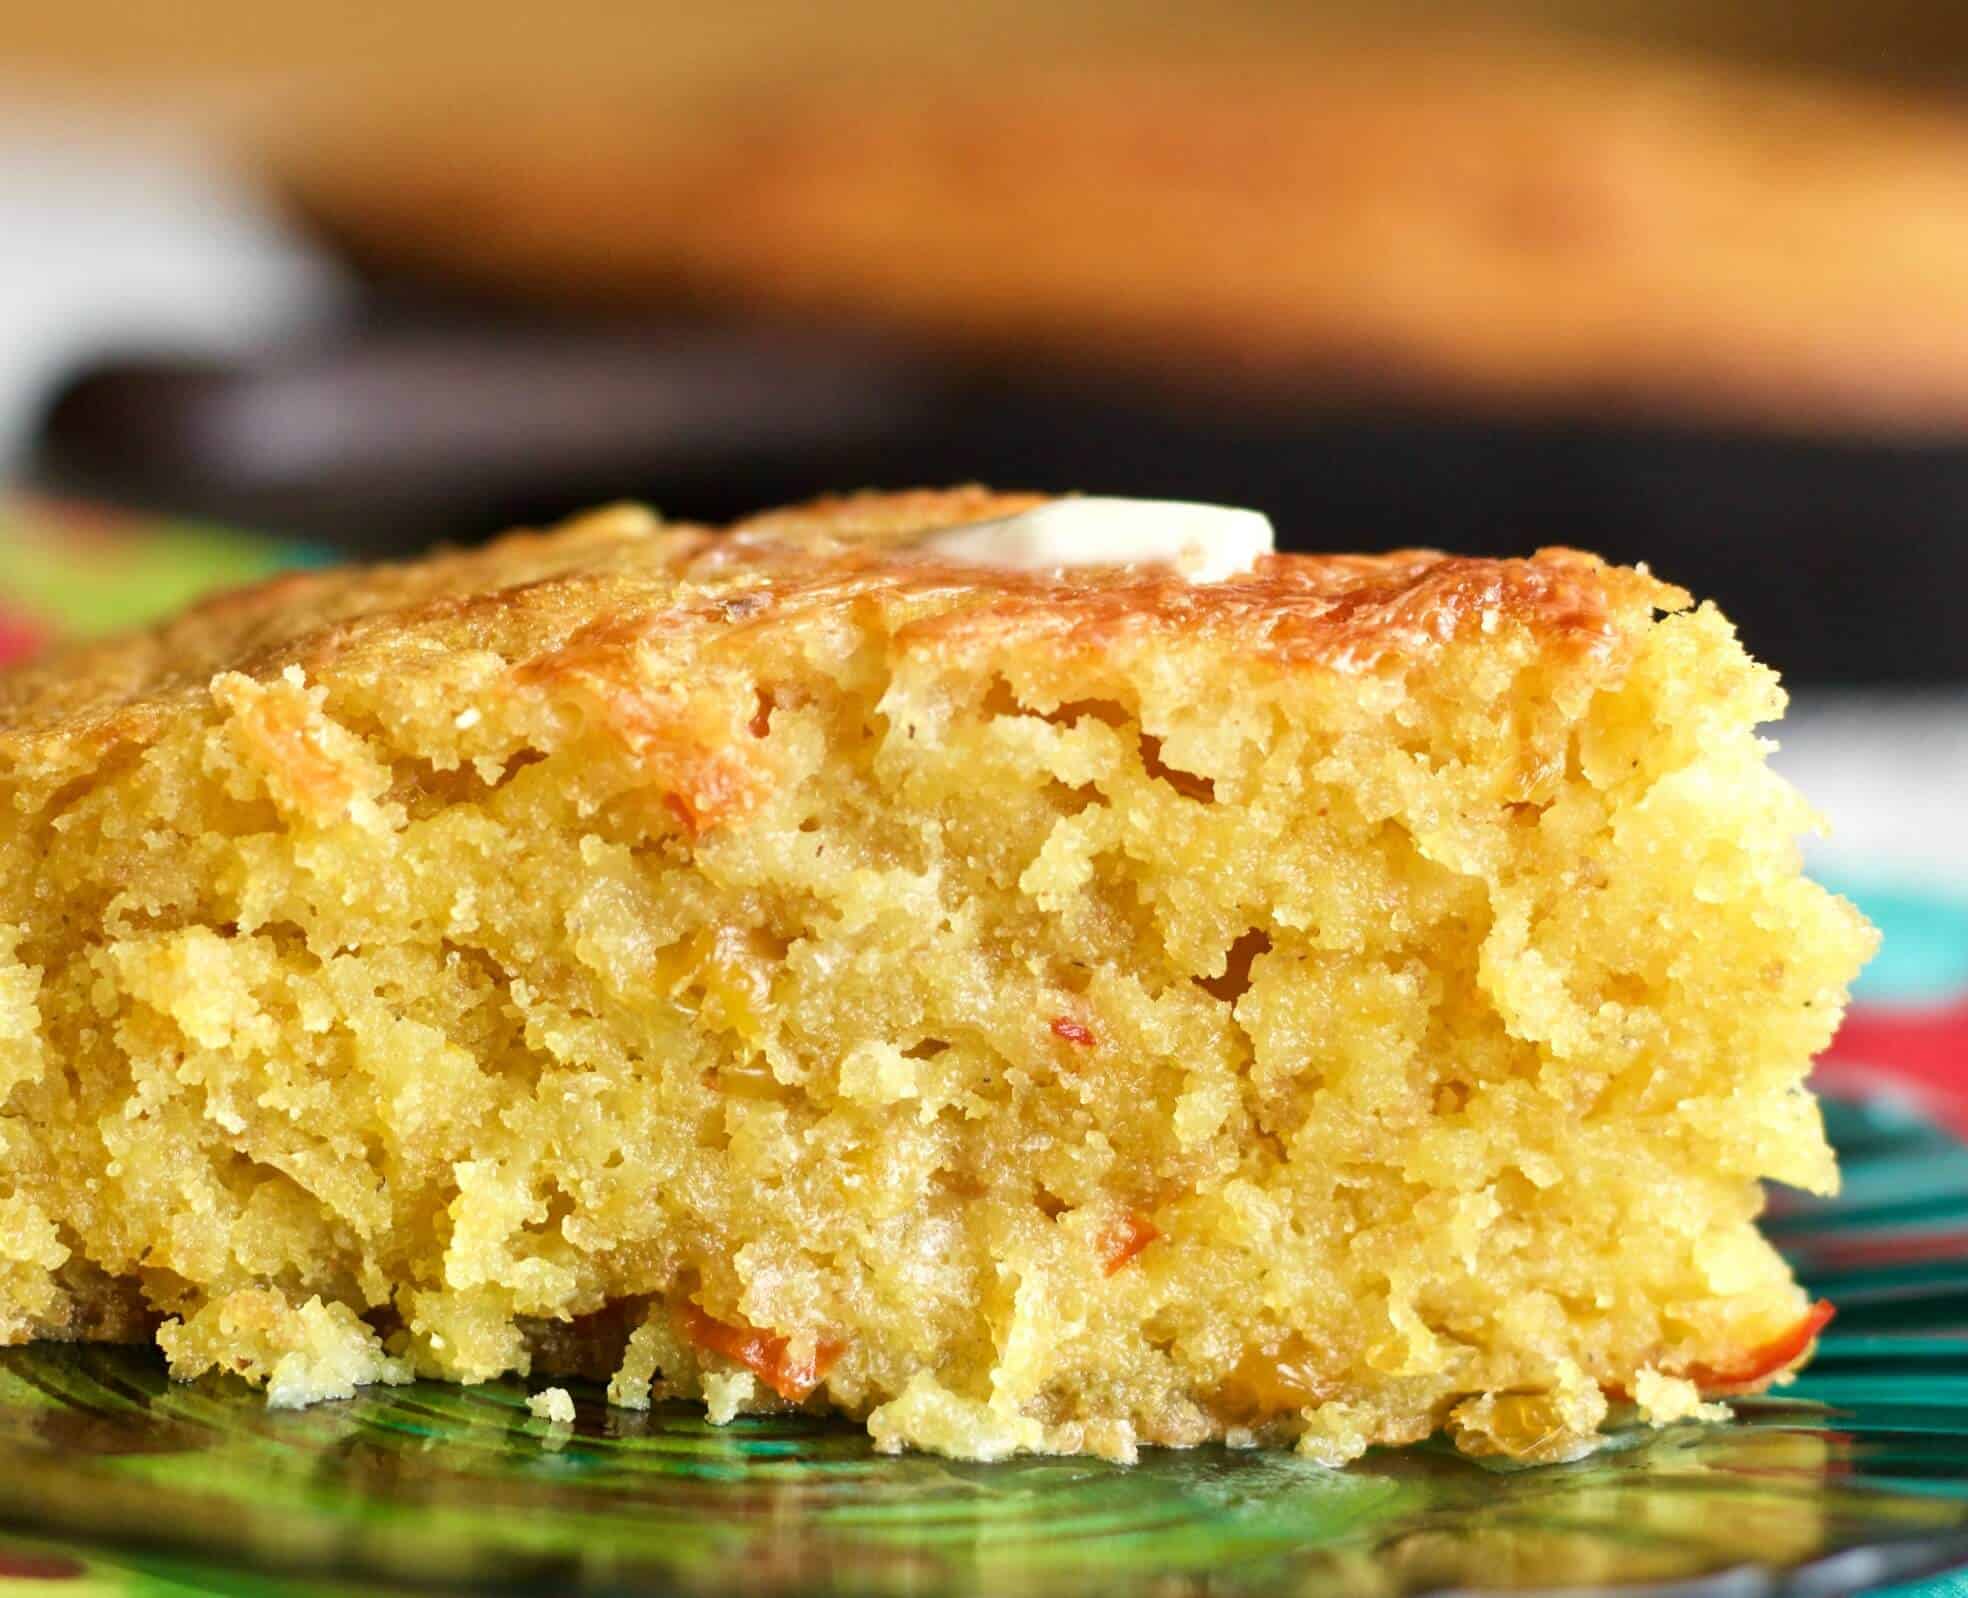 Mexican Cornbread Recipe Homemade Food Junkie,How To Get Rid Of Ants In Your Home Fast